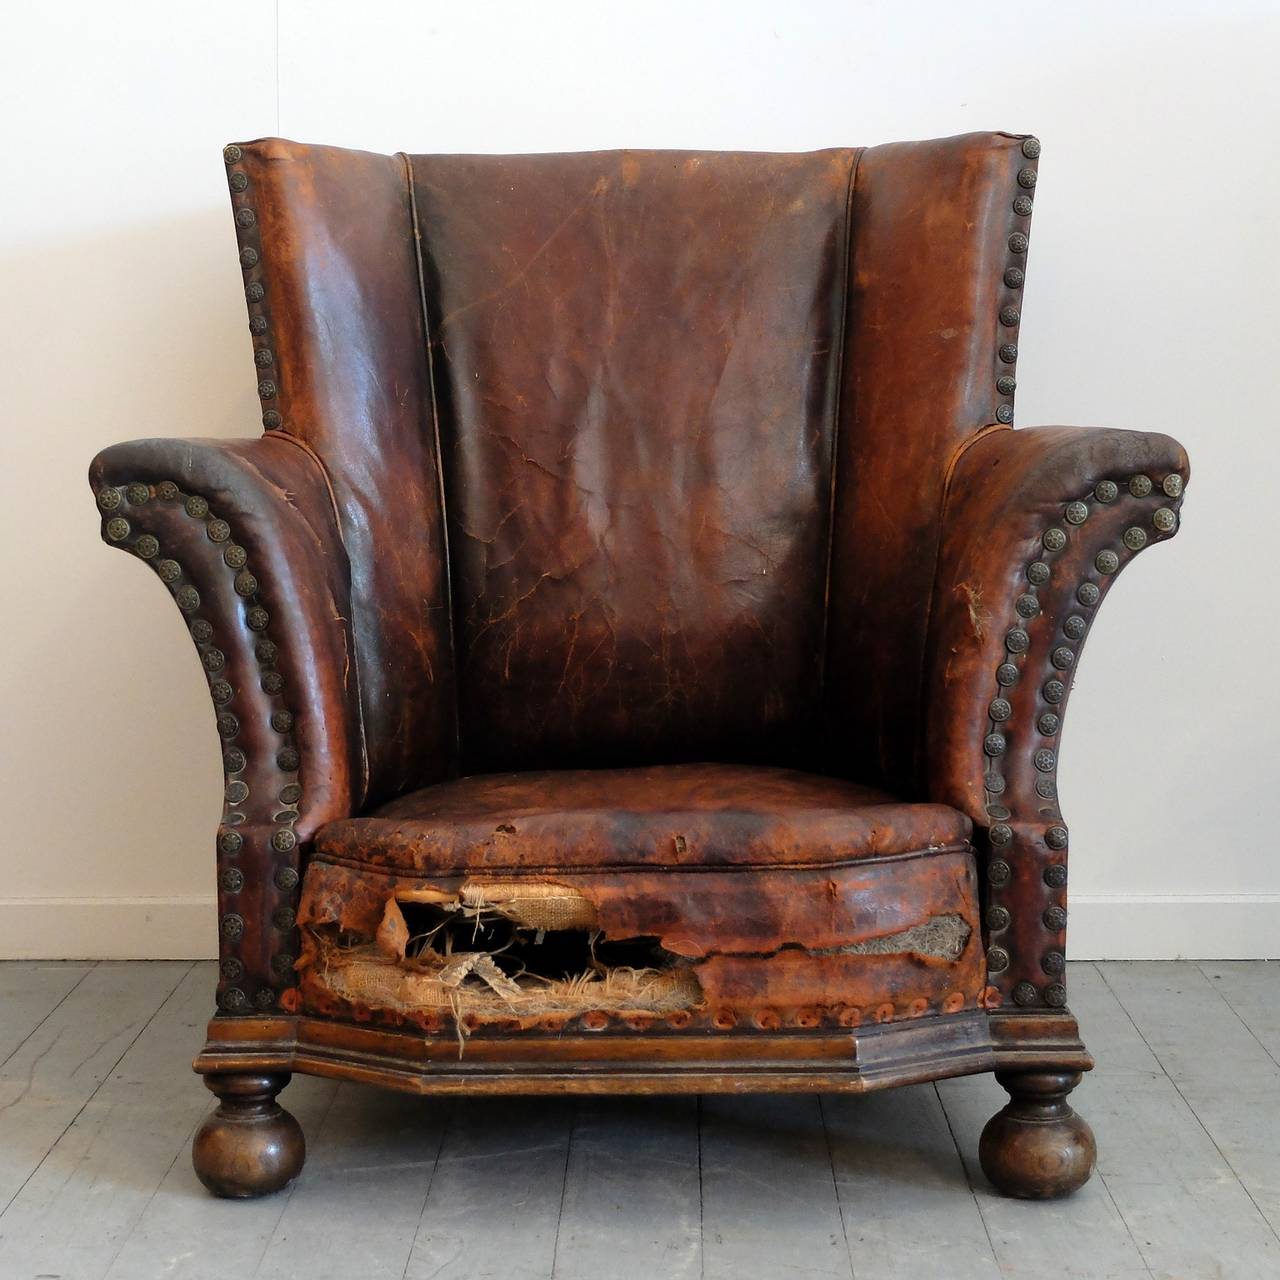 Distressed Leather Armchair In Distressed Condition For Sale In Fitzroy, Victoria